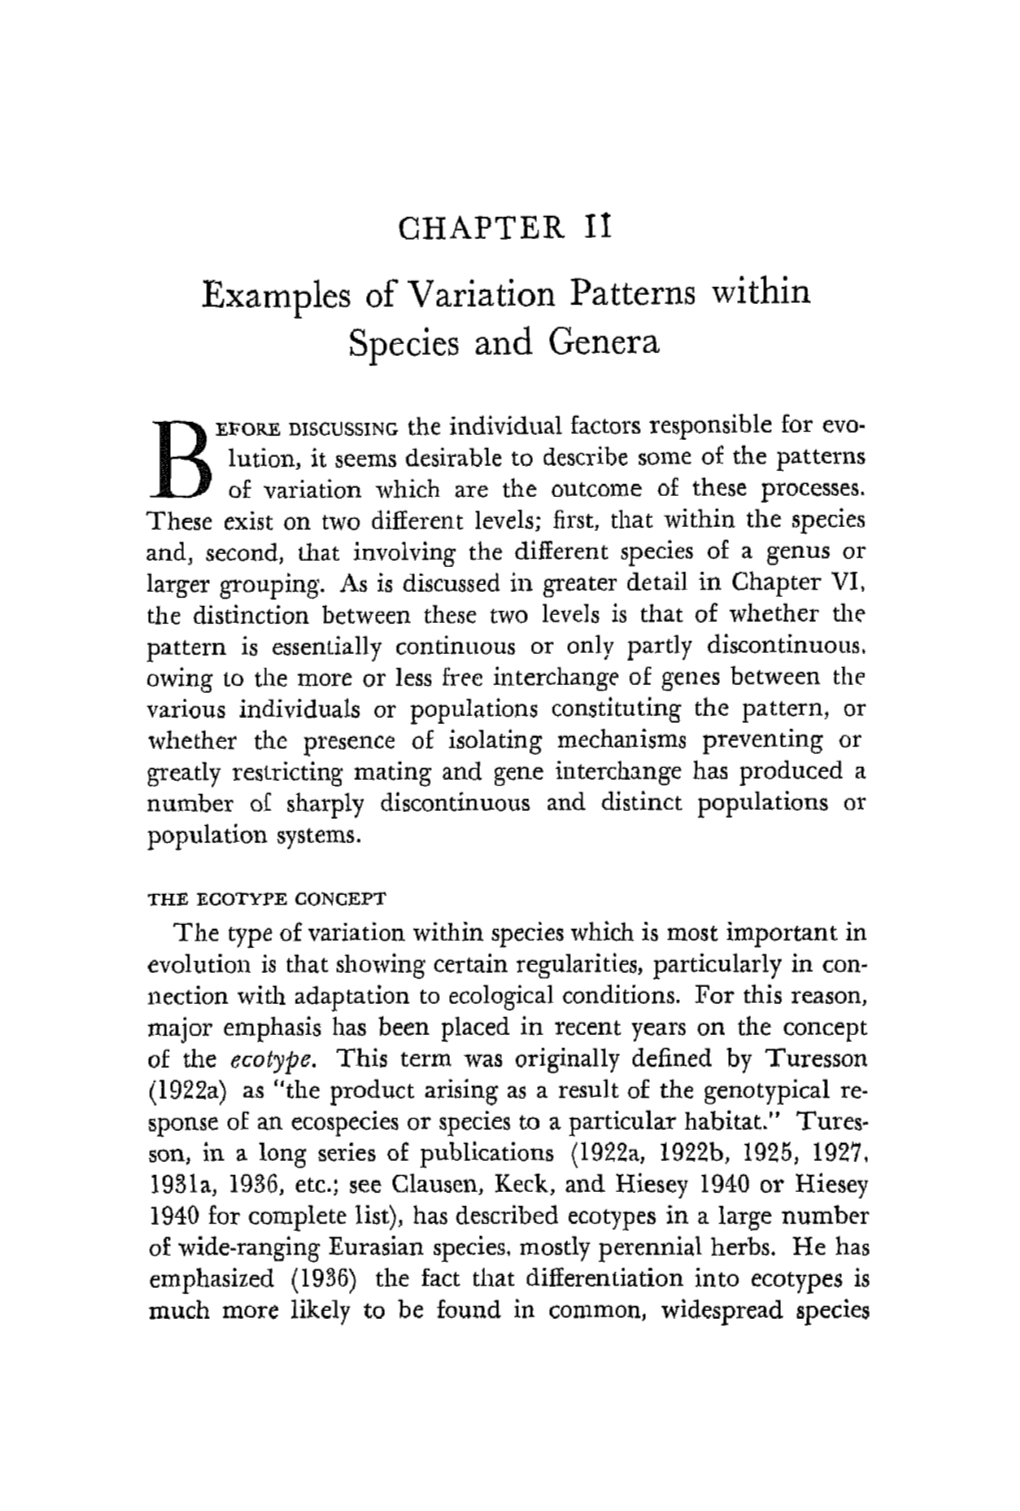 Chapter 2. Examples of Variation Patterns Within Species and Genera